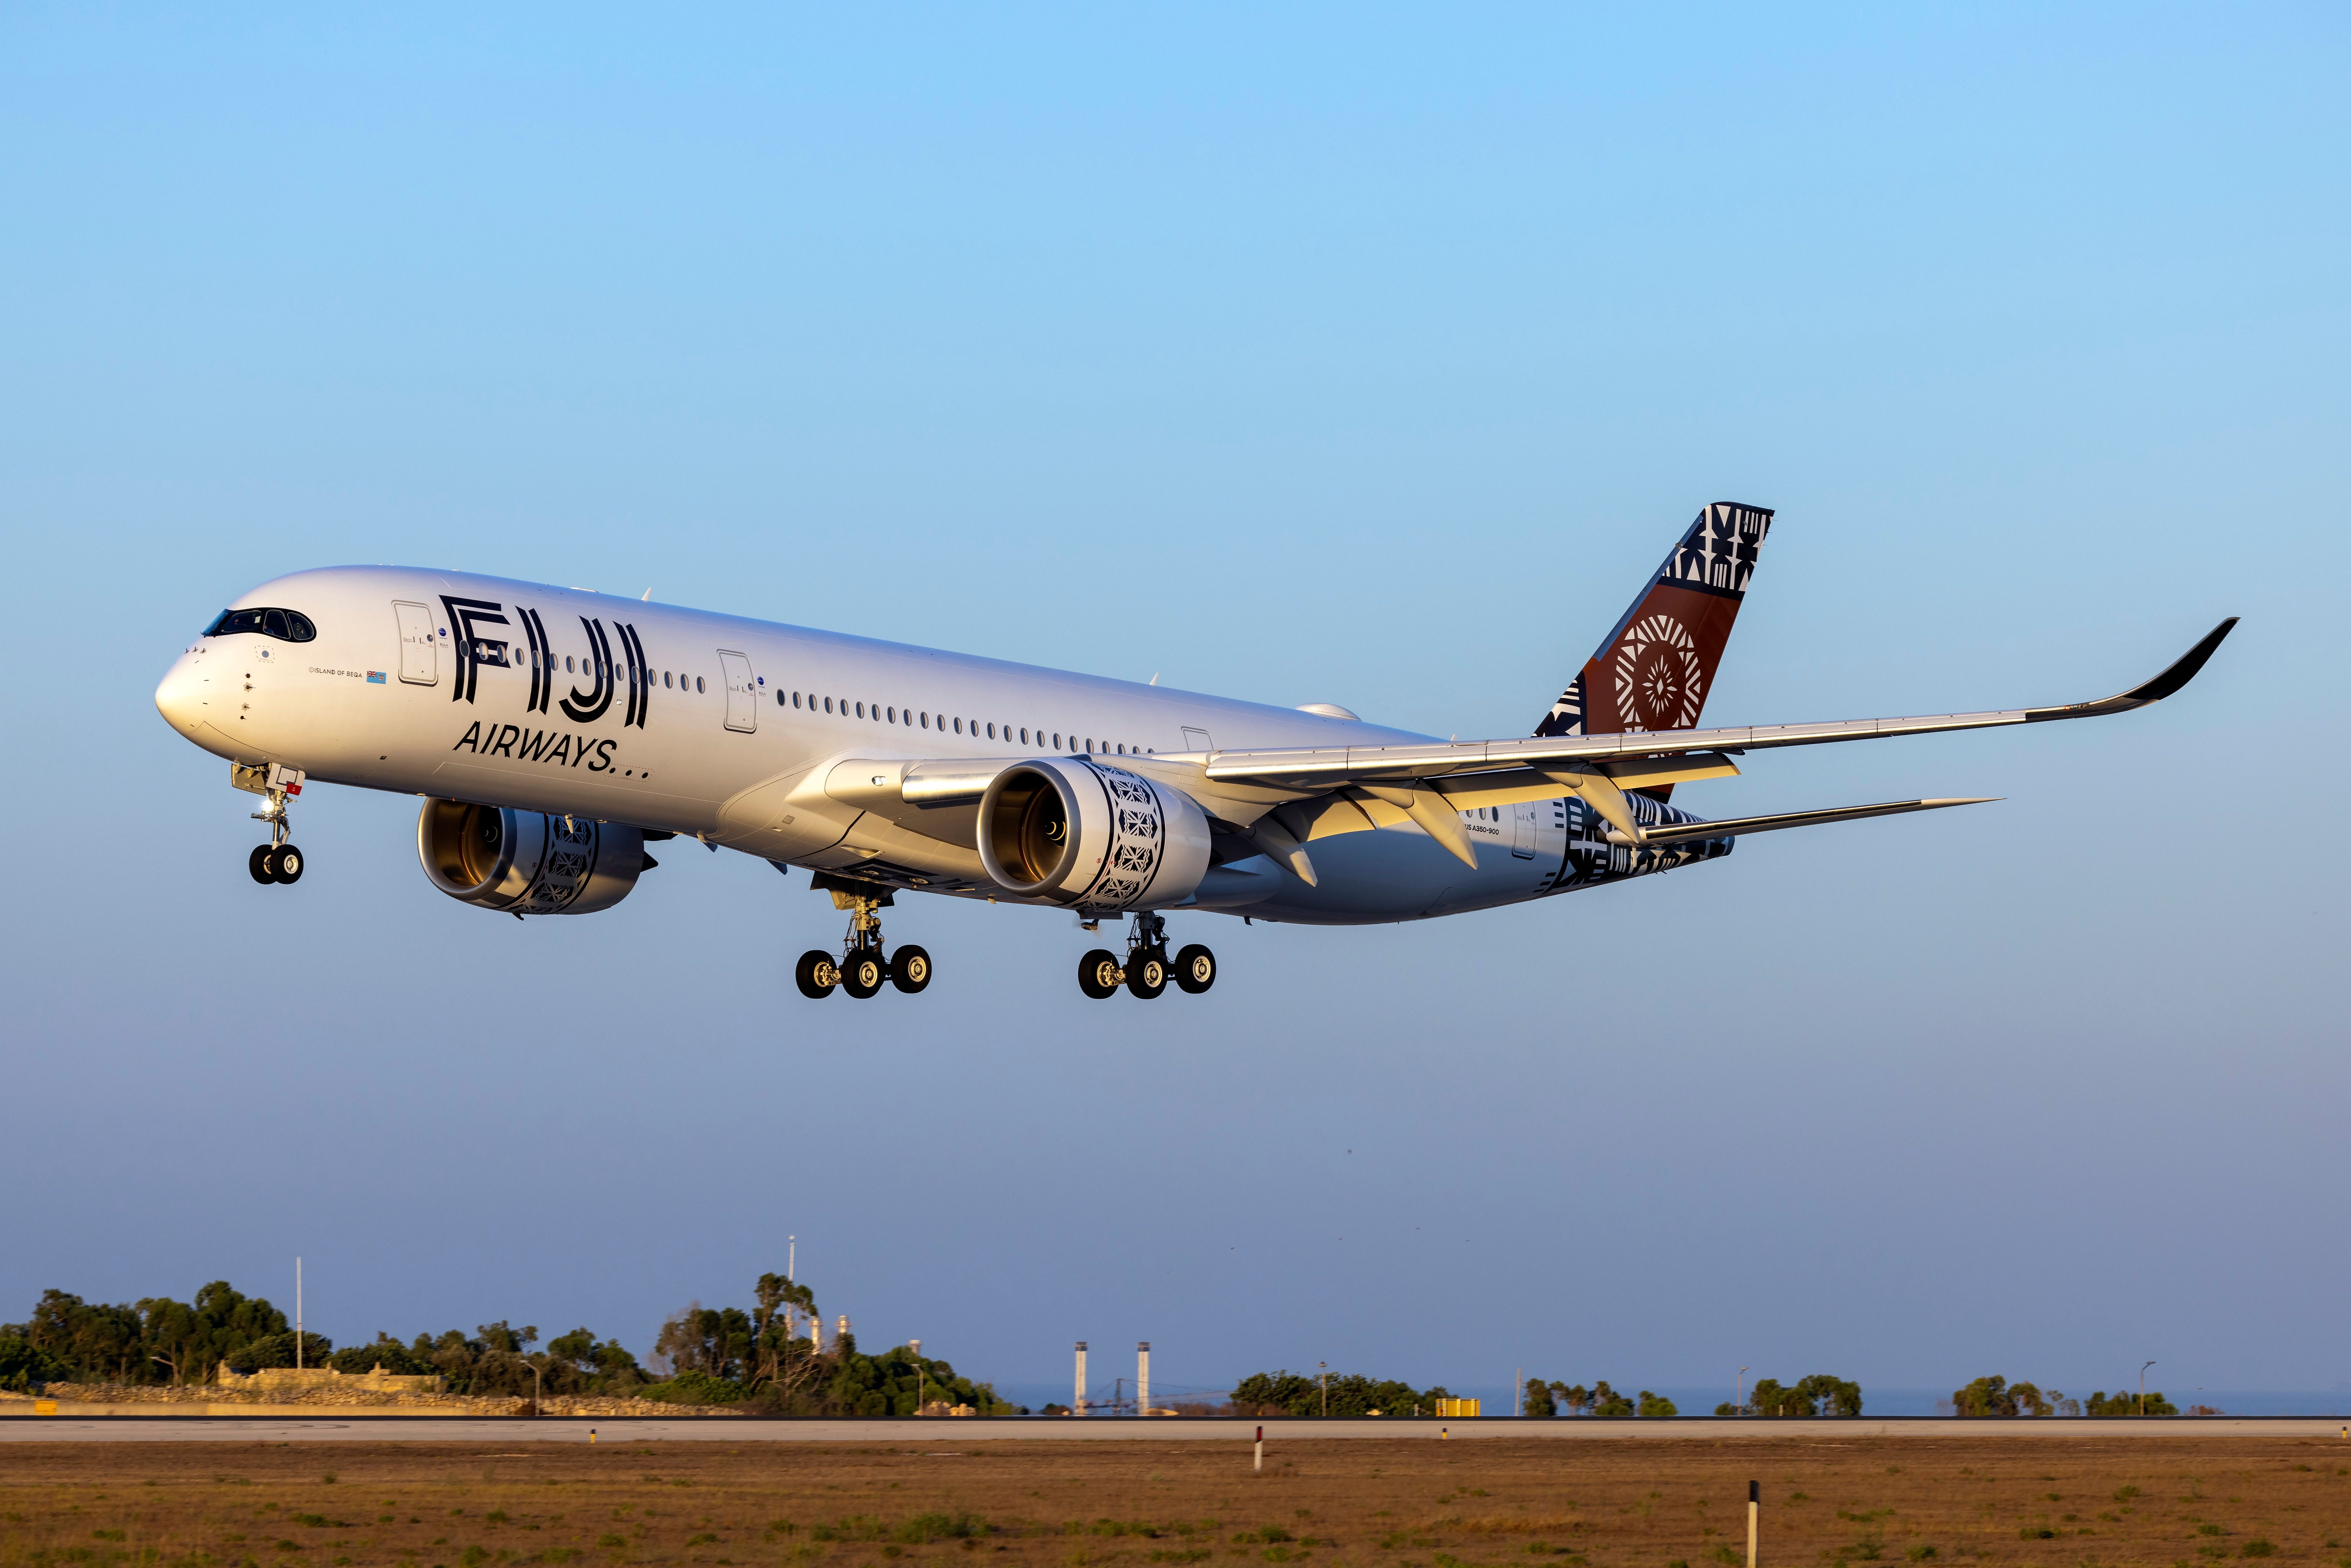 A Fiji Airways Airbus A350-900 about to land.